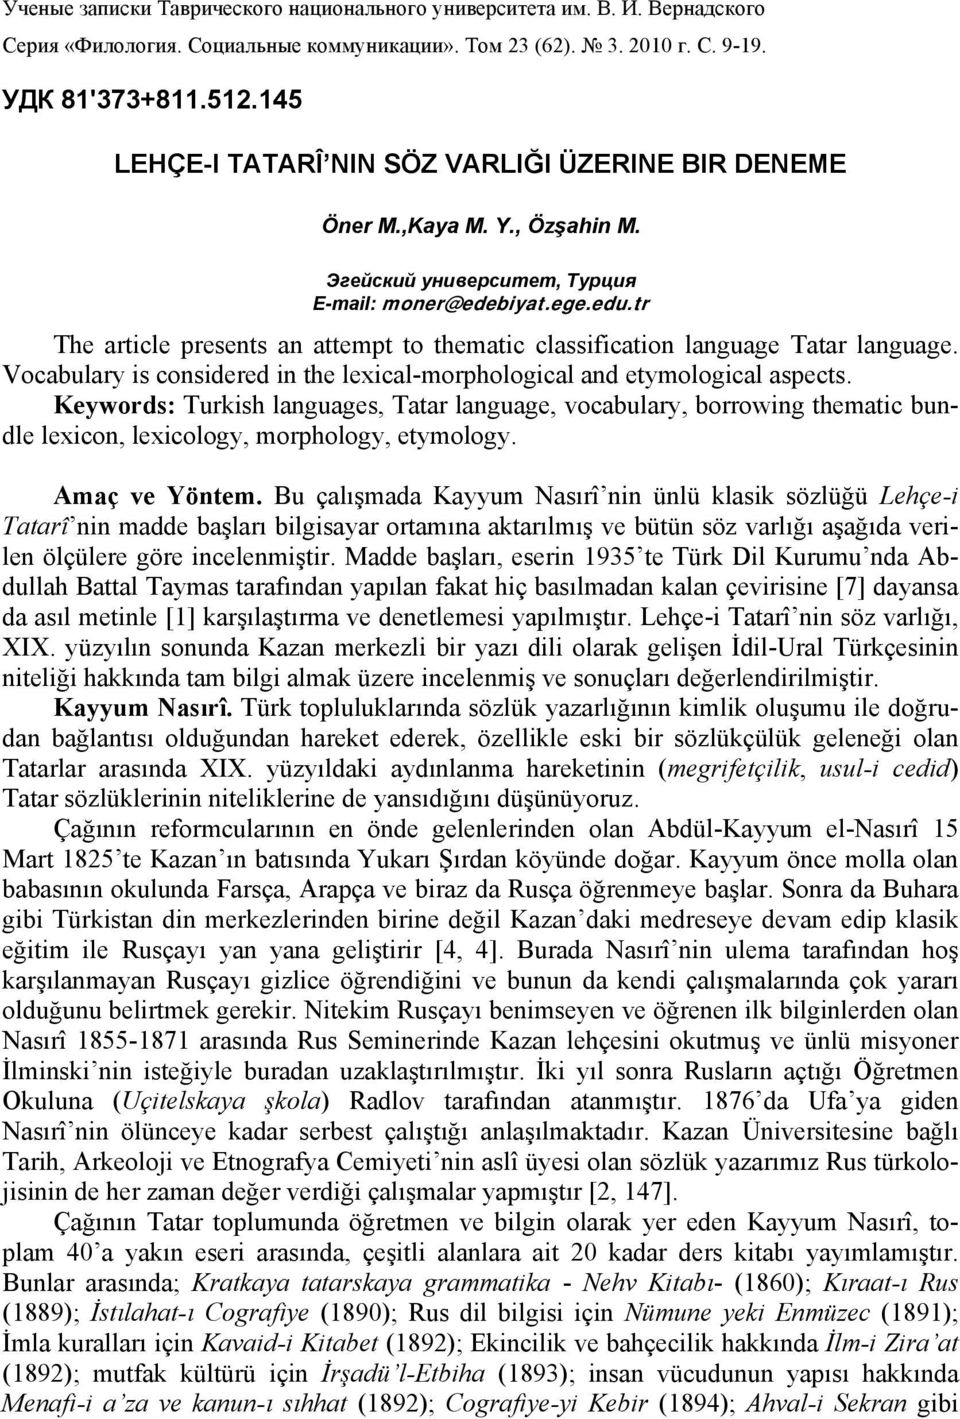 tr The article presents an attempt to thematic classification language Tatar language. Vocabulary is considered in the lexical-morphological and etymological aspects.